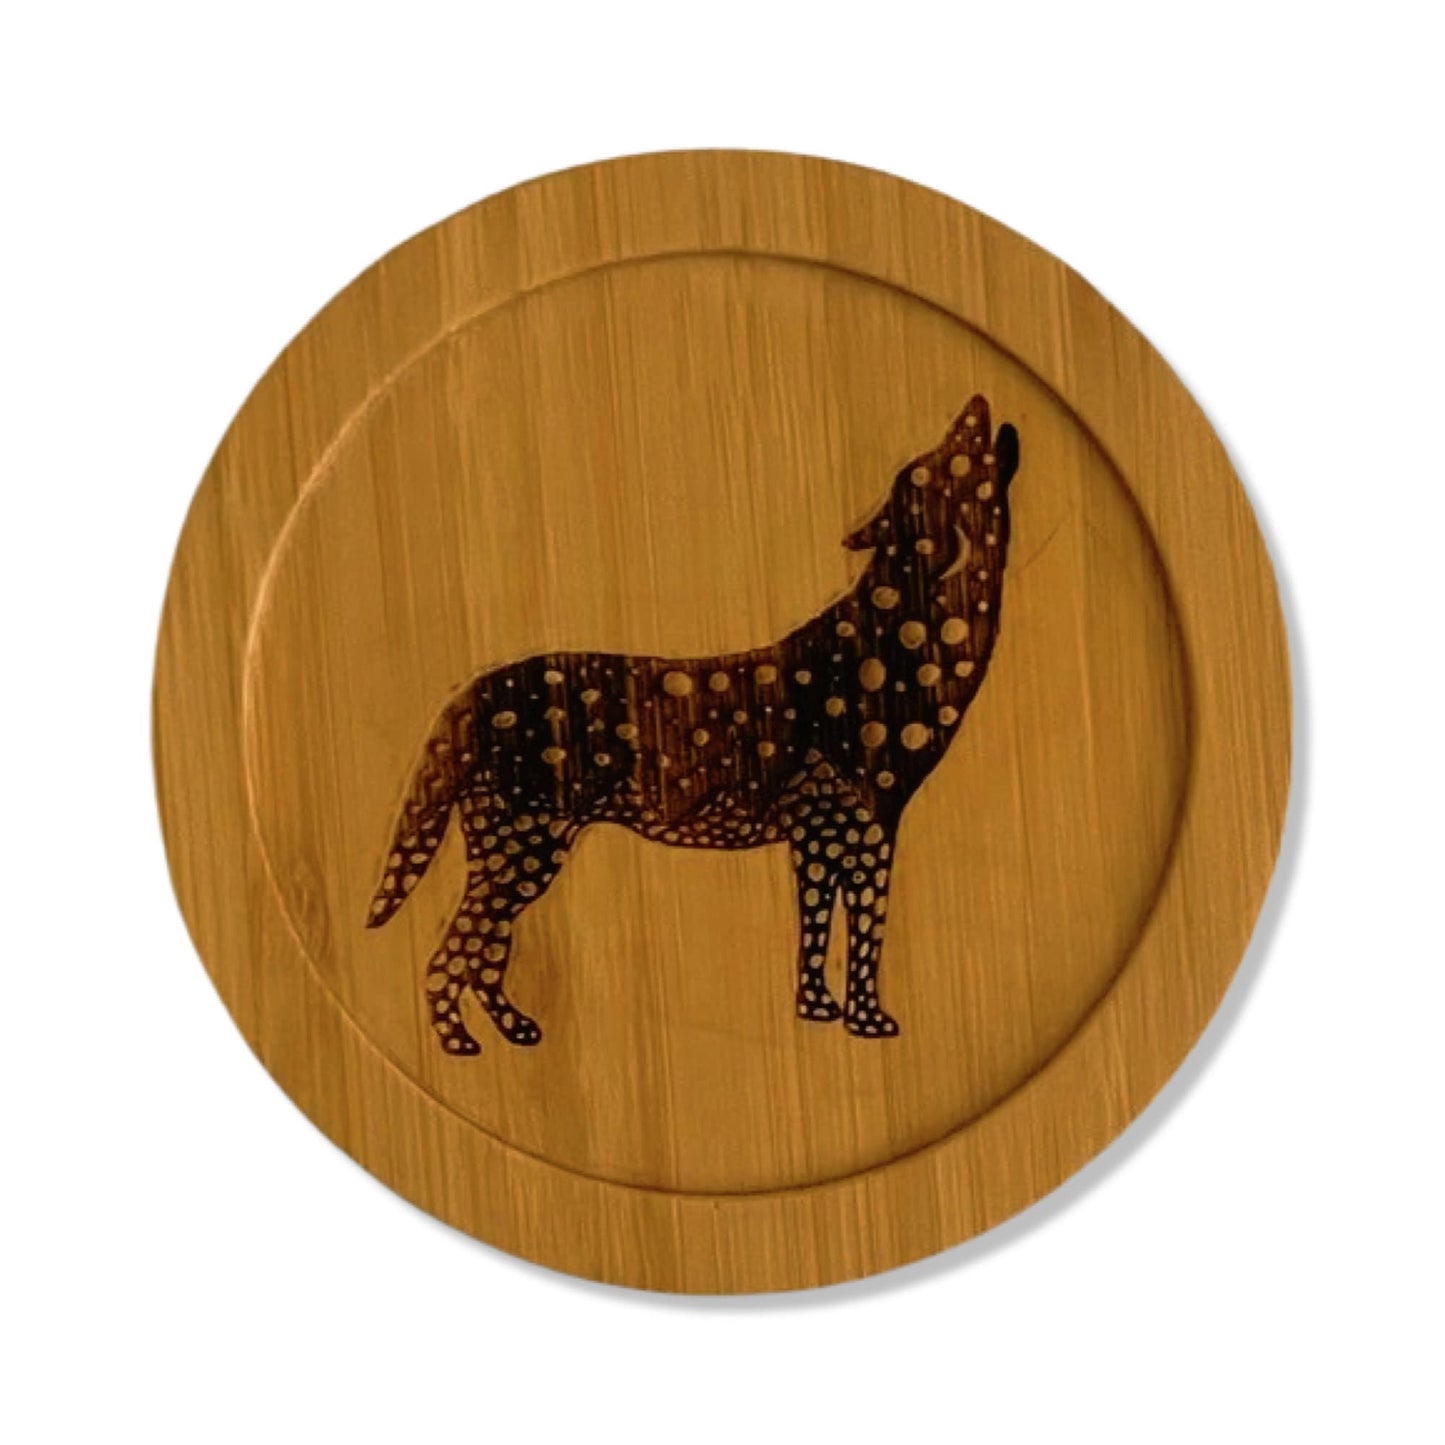 Wolf Laser Etched Bamboo Coaster - Original art - made in the USA - lightweight, eco-friendly, water resistant